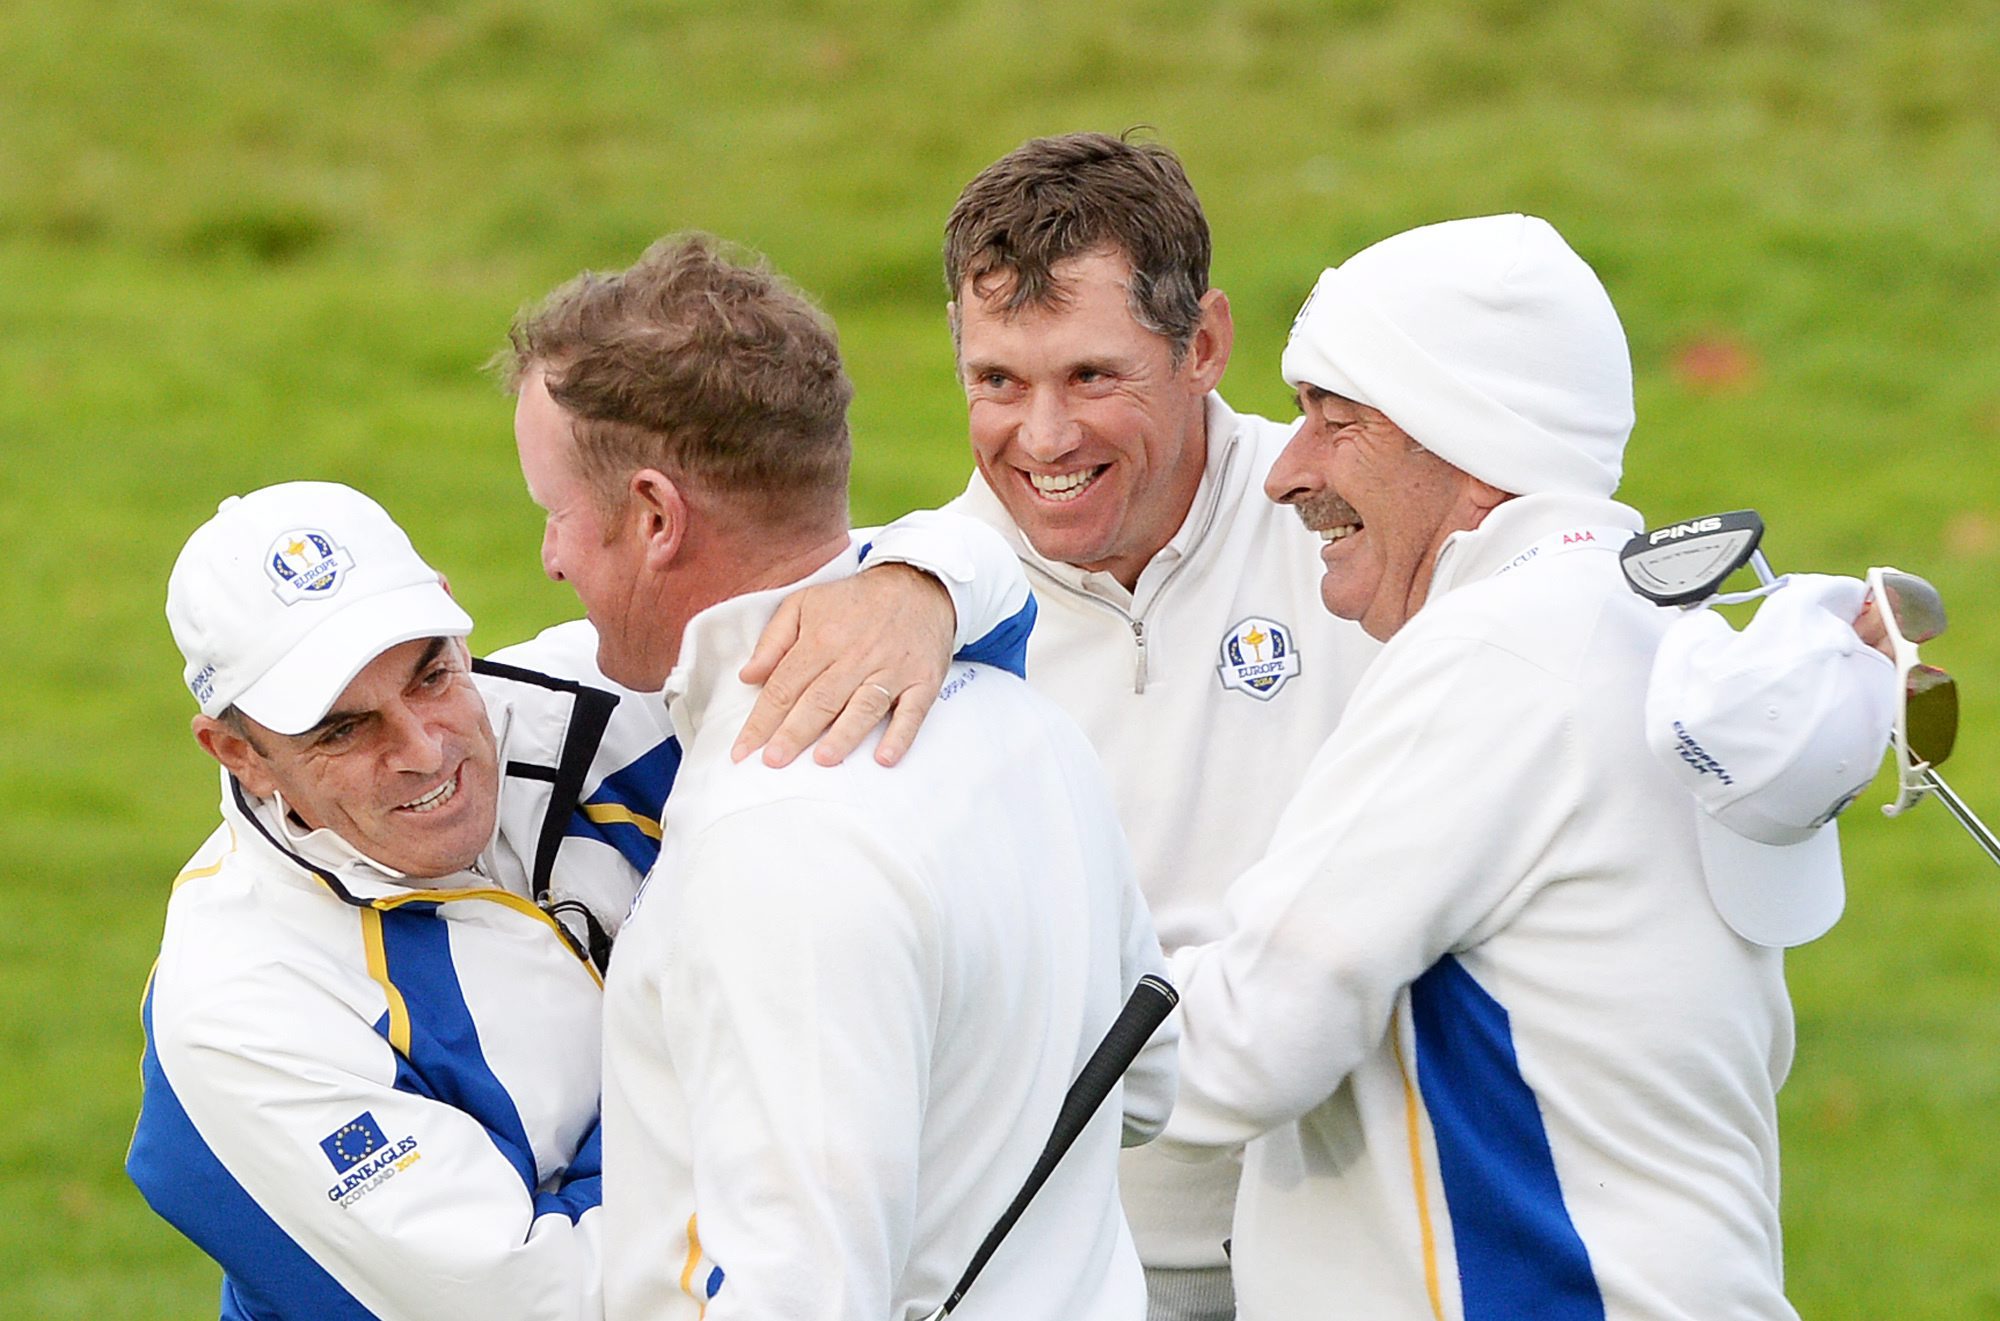 Captain Paul McGinley hugs Jamie Donaldson while teammate Lee Westwood  is congratulated by vice captain Sam Torrance  after winning their foursomes match against Matt Kuchar and Zach Johnson. Photo: EPA